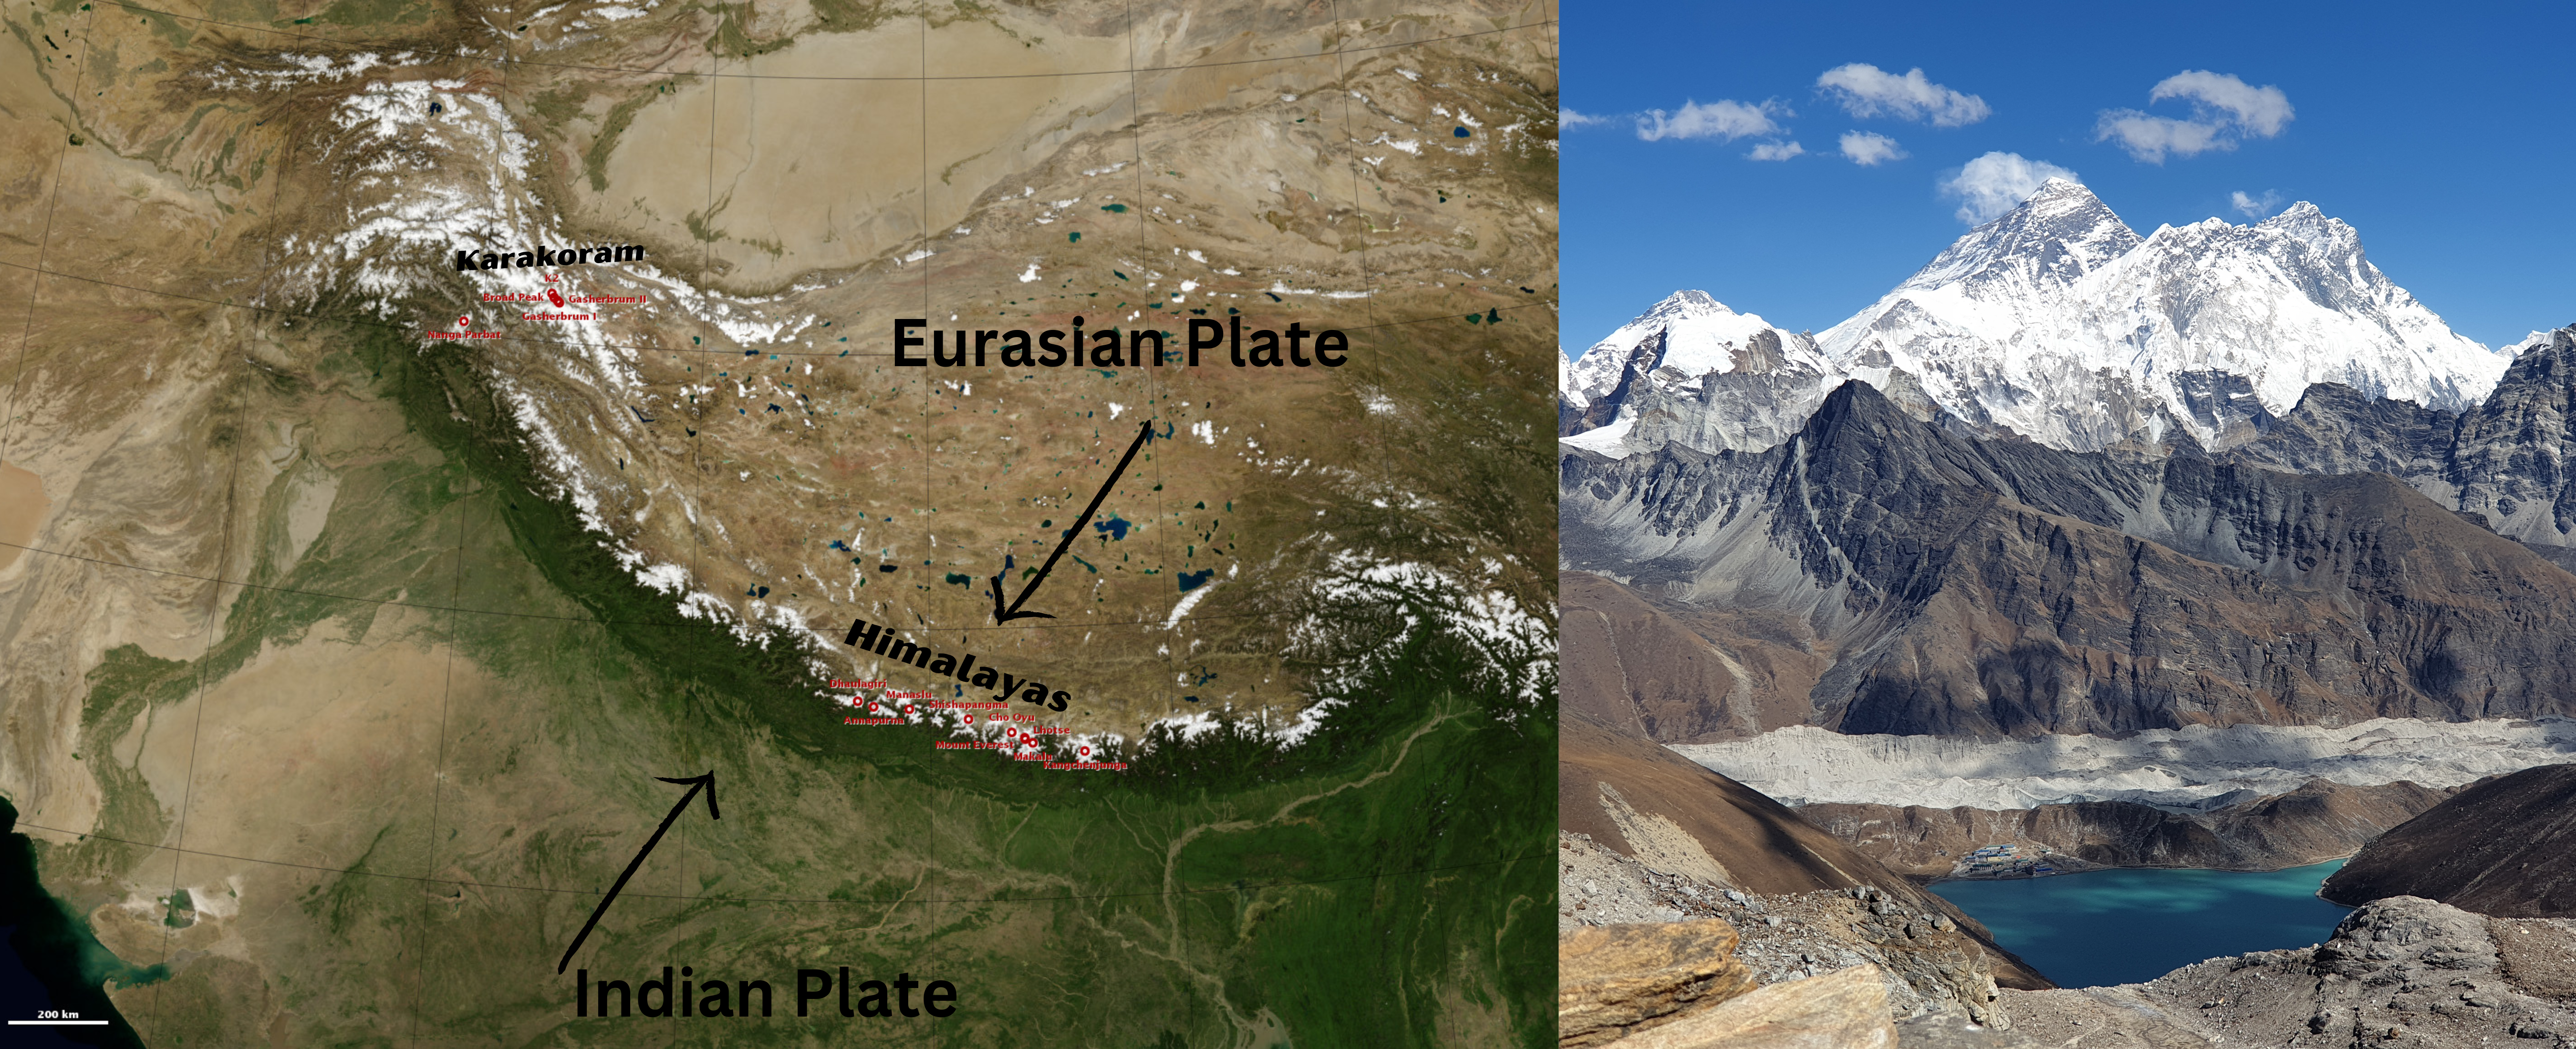 Himalayas found along the convergence of the Eurasian and Indian plates